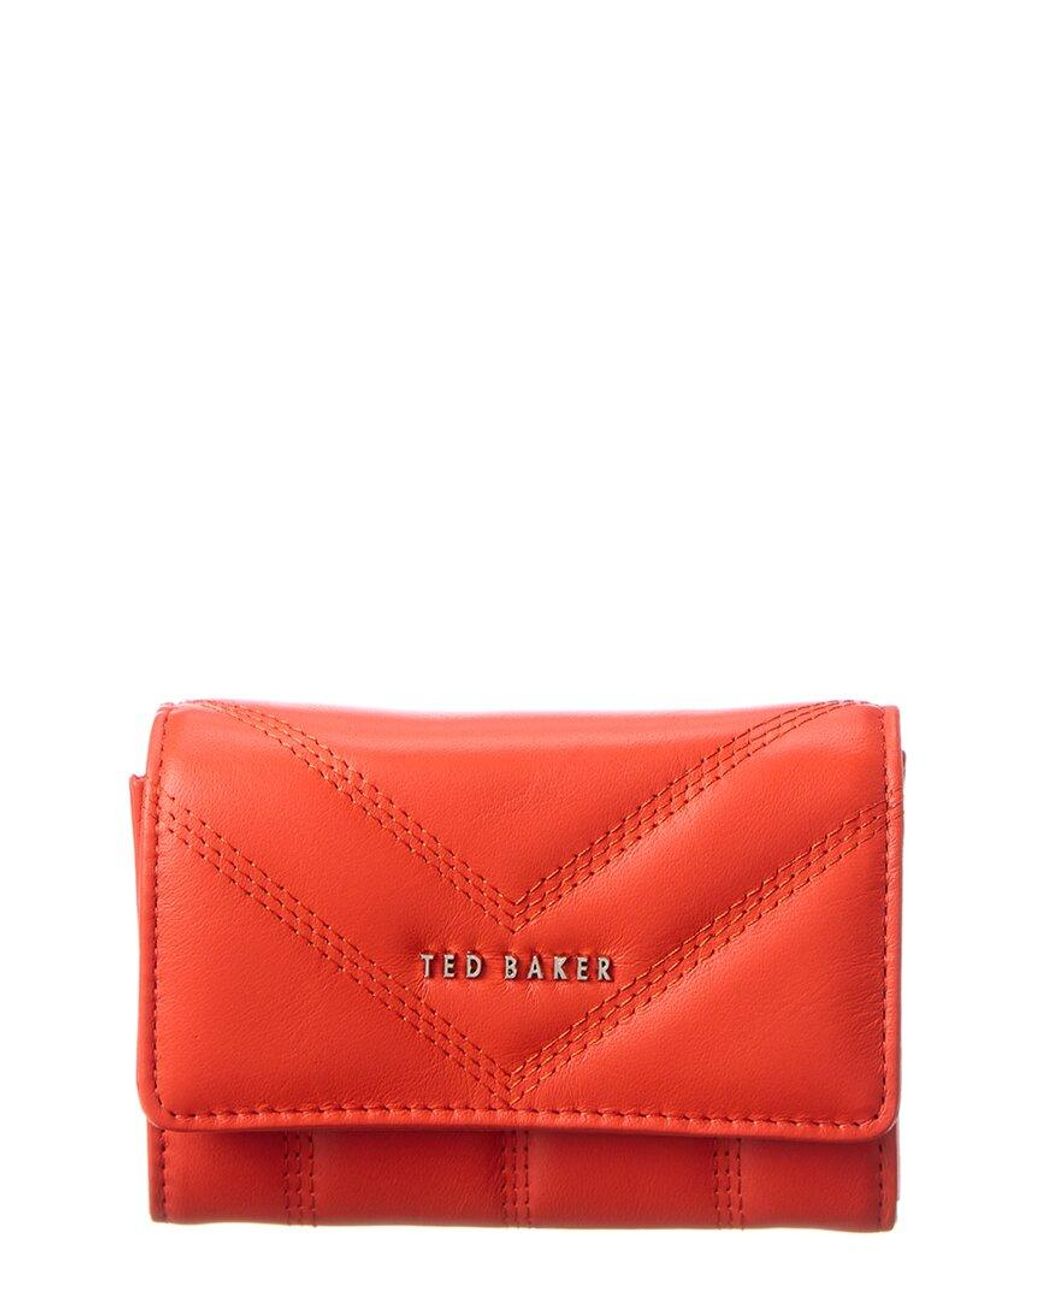 Ted Baker Ayvill Puffer Small Leather Matinee Purse in Red | Lyst